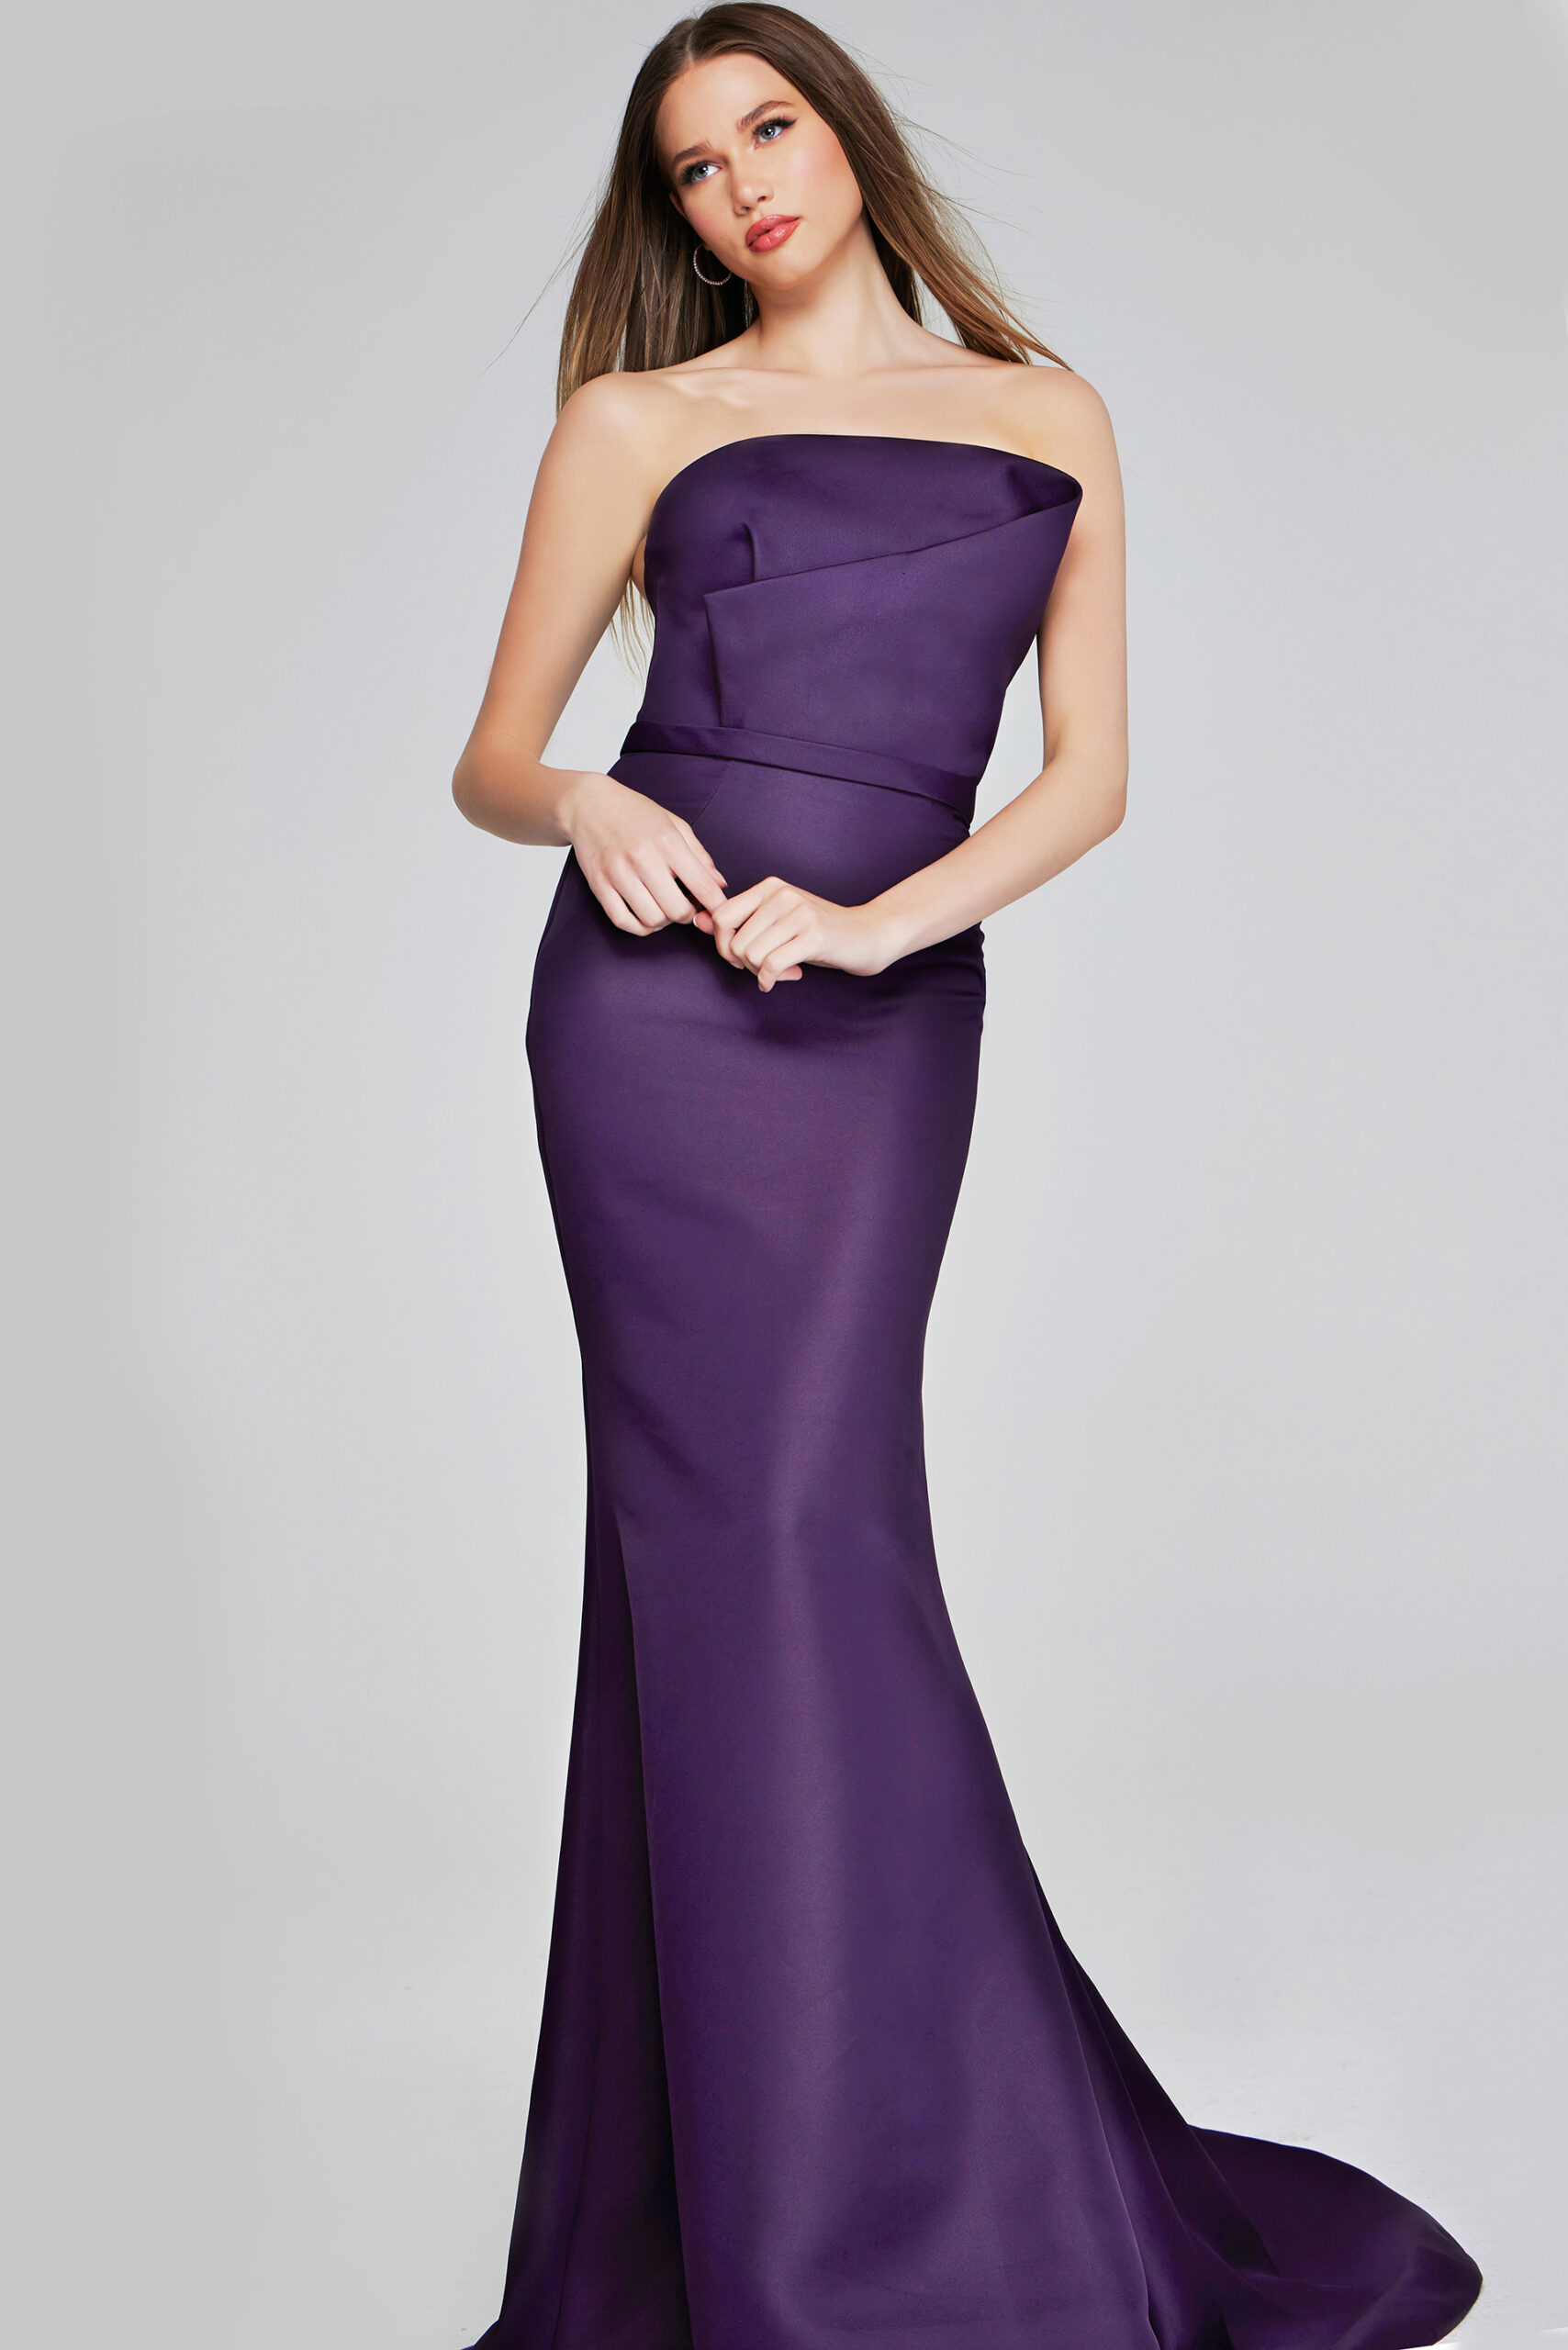 Model wearing Classic Eggplant Strapless Gown with Elegant Silhouette 40598